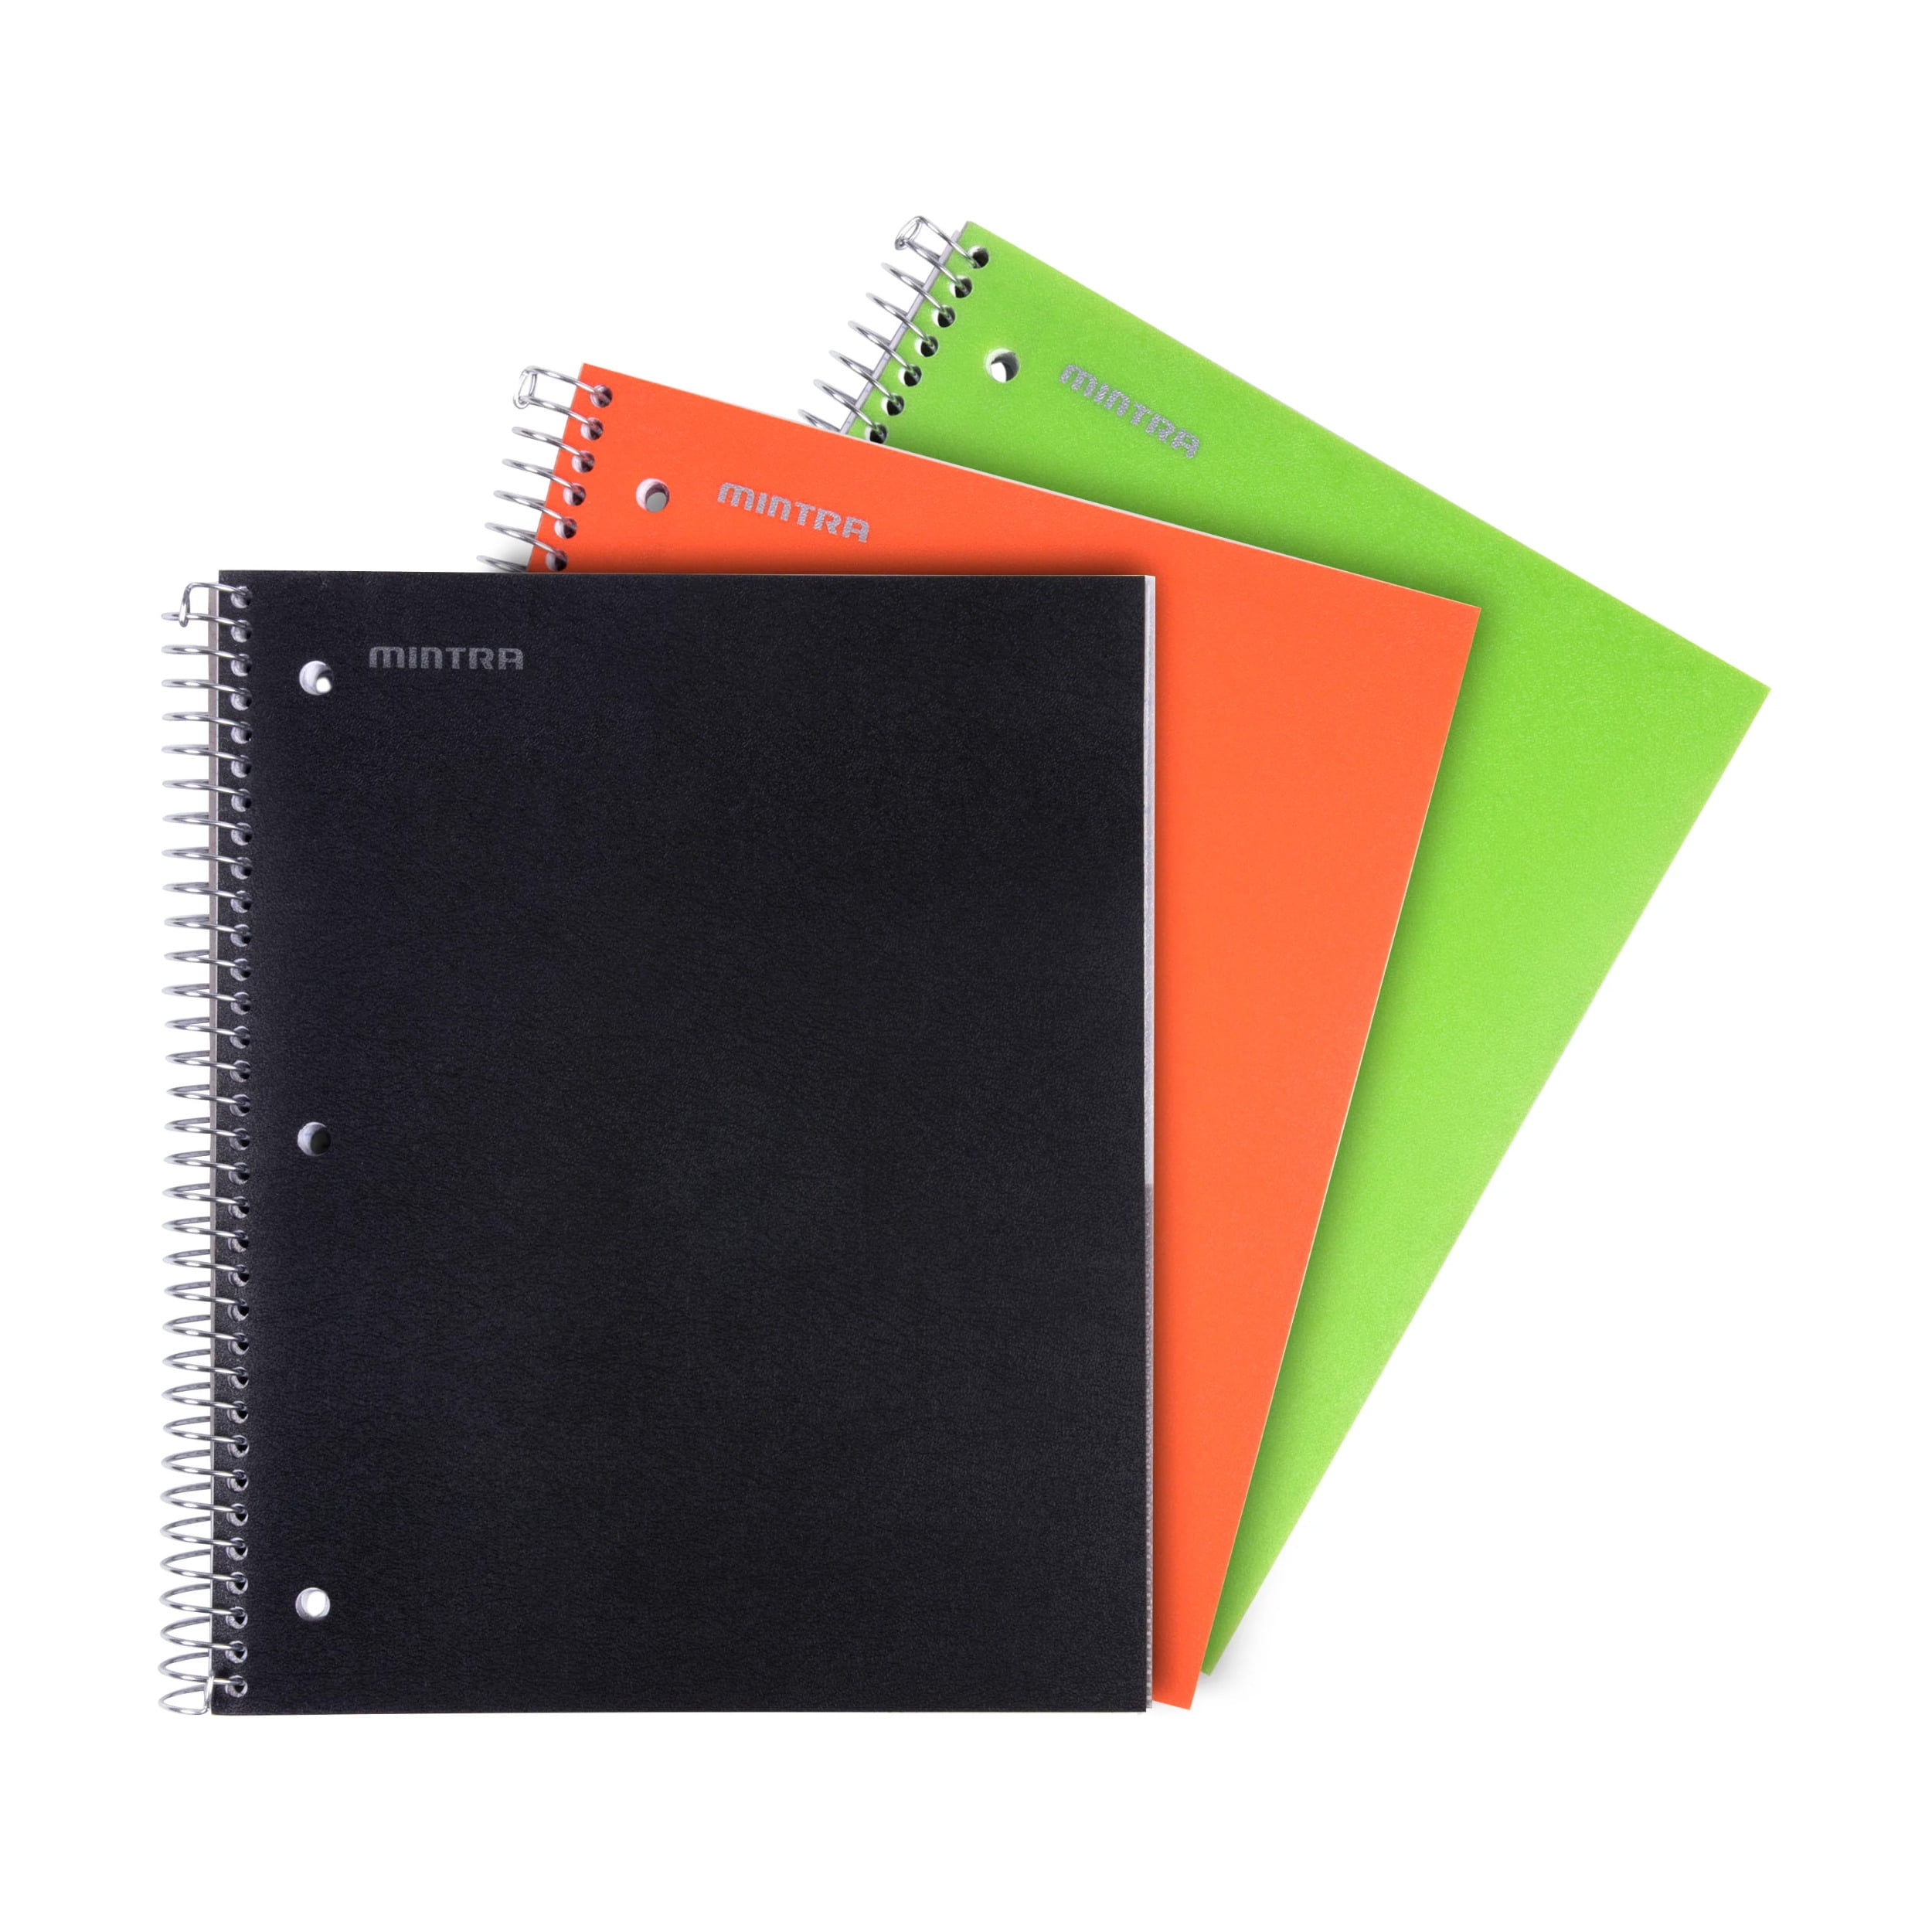 LEGAMI Trio 3 in 1 Notebook Flora – A4 with spiral binding